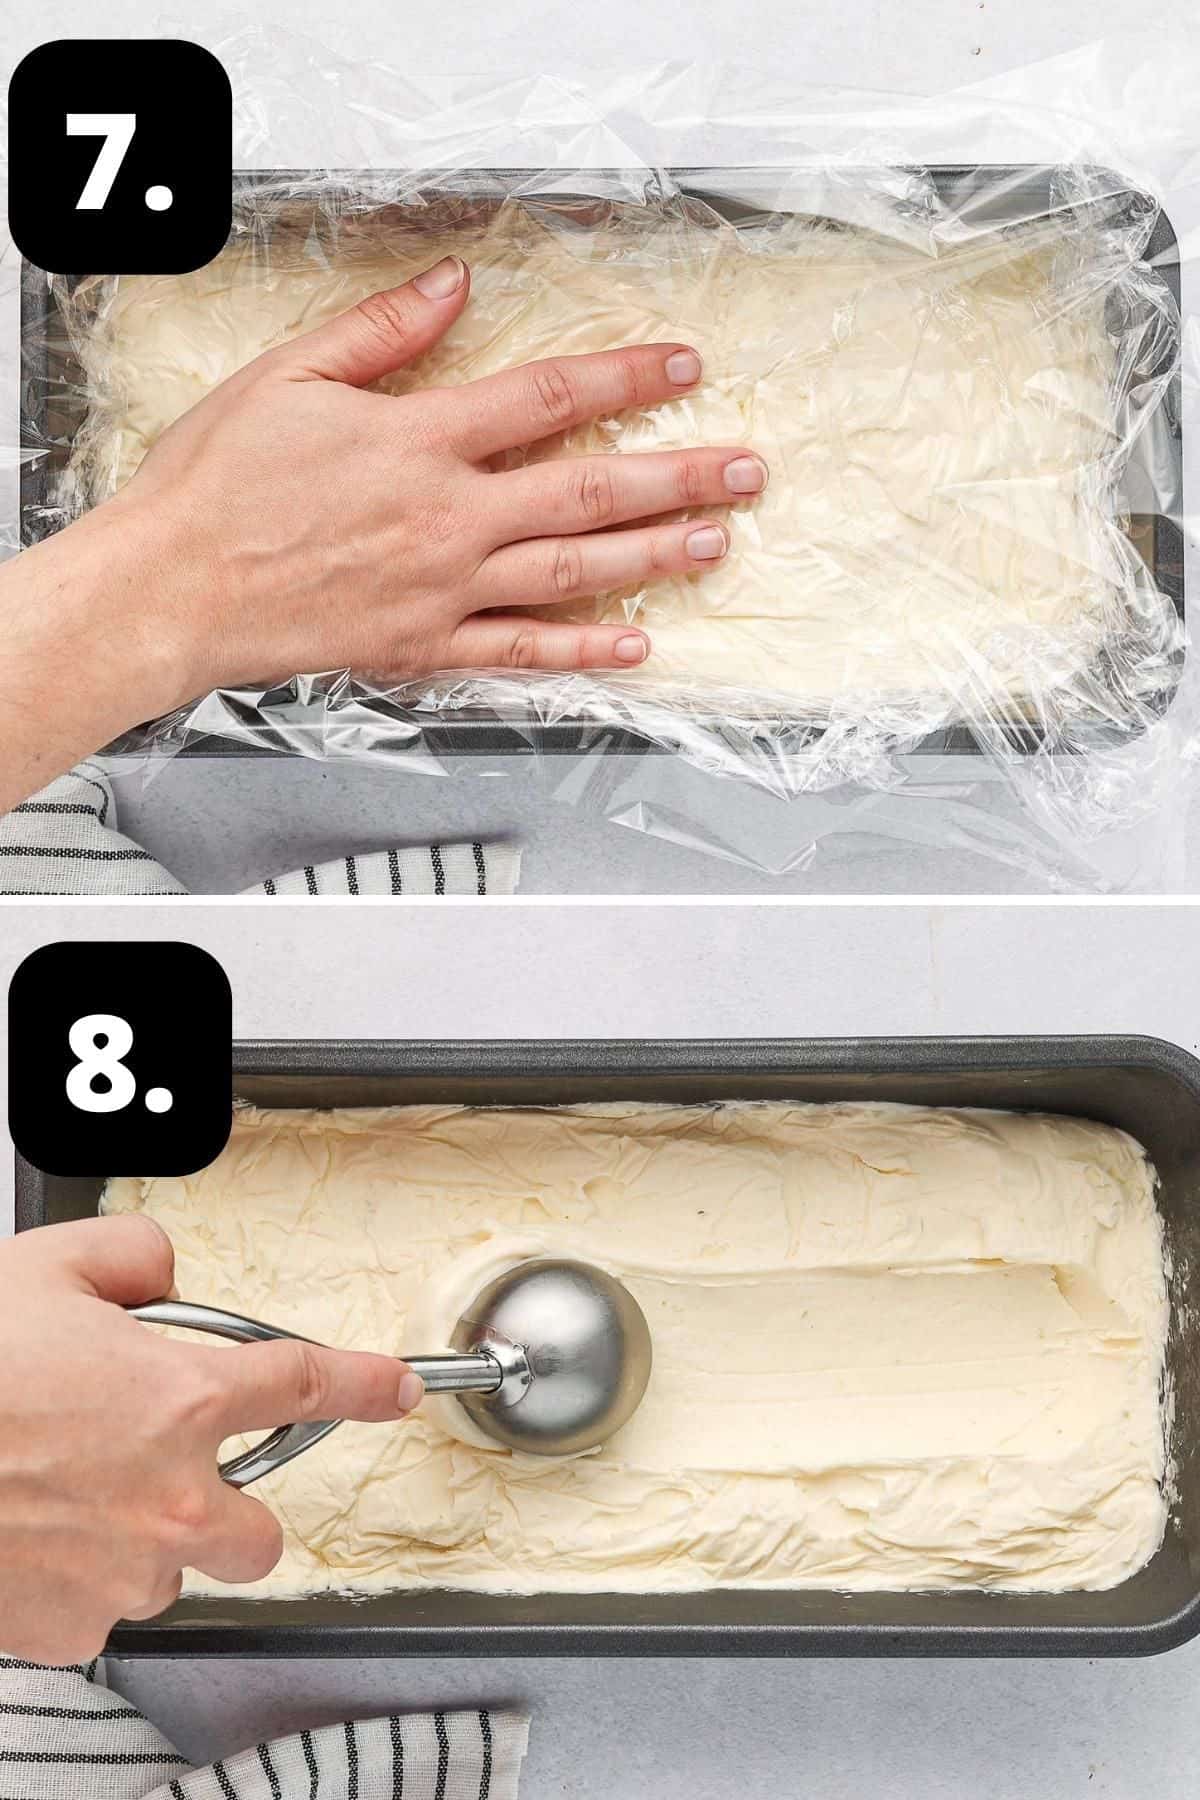 Steps 7-8 of preparing this recipe - topping the dish with cling film and scooping a serve of ice cream once frozen.